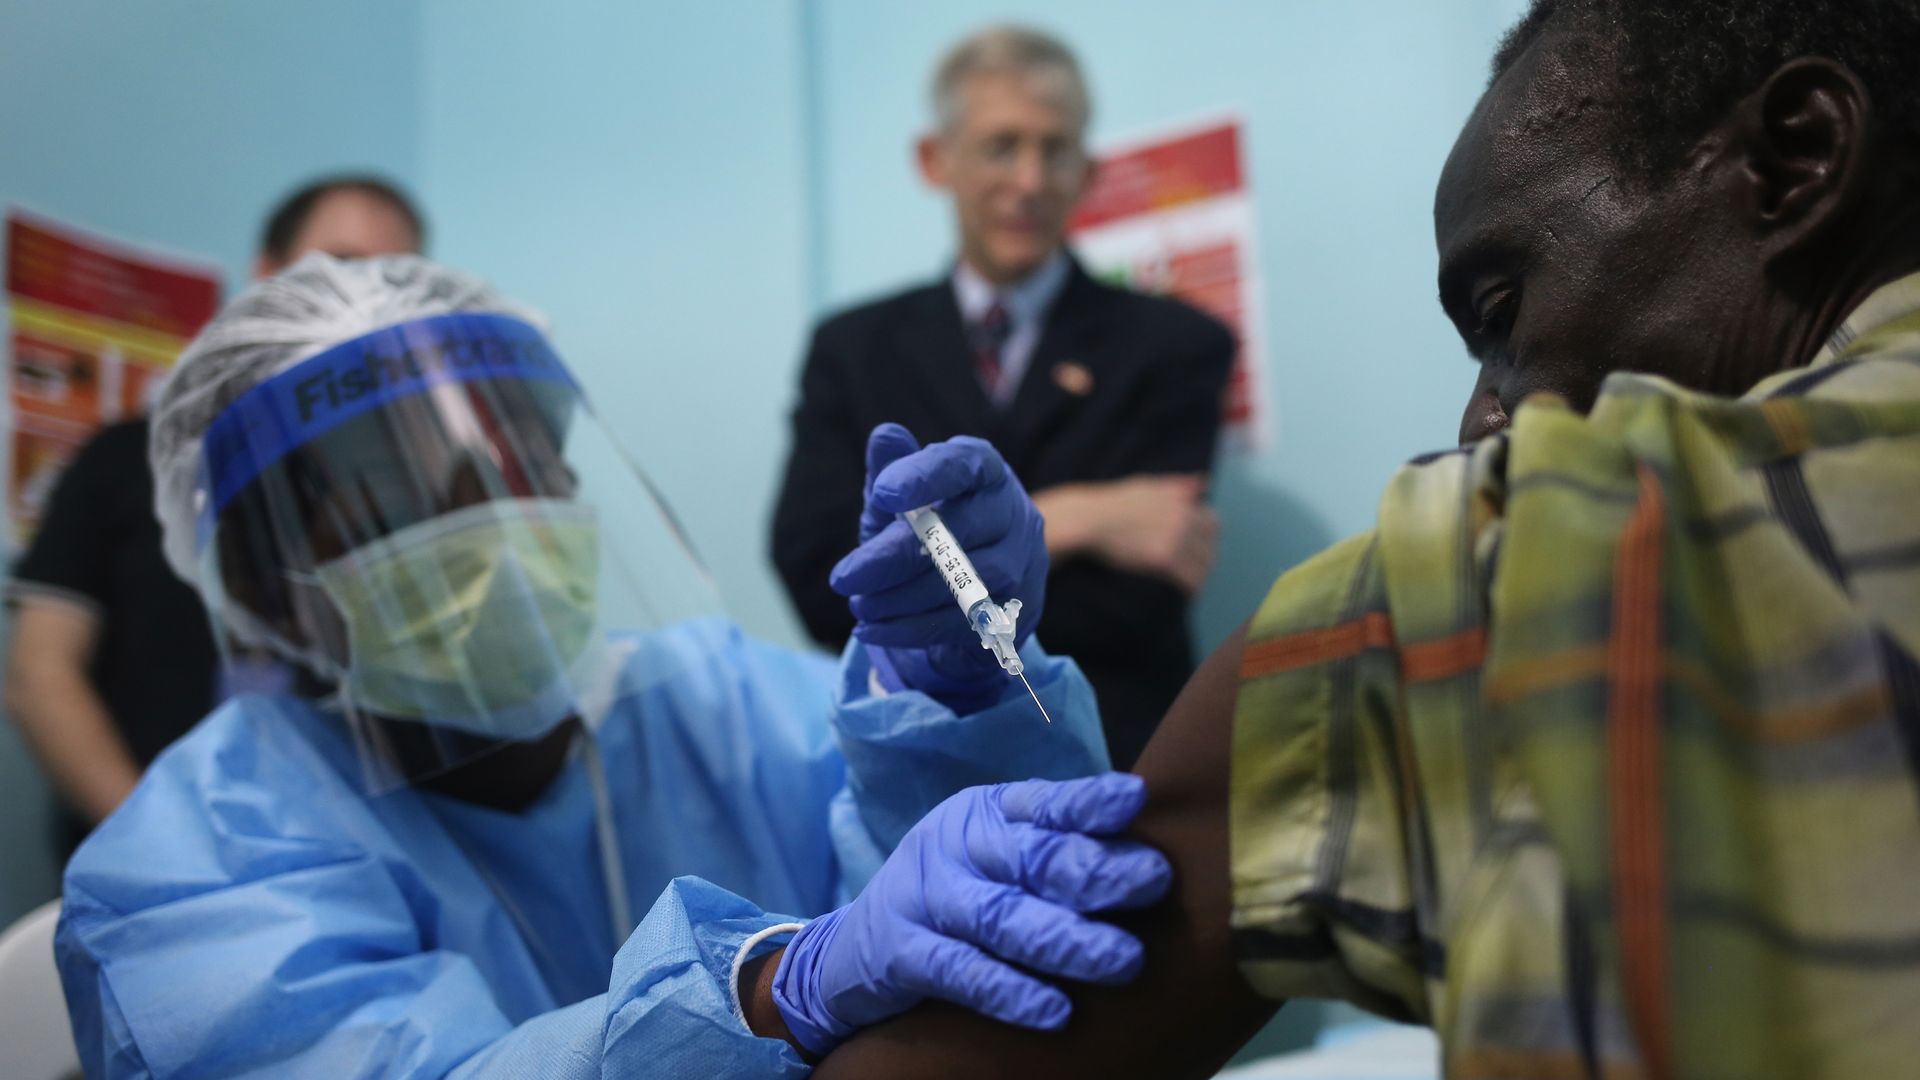 A nurse administers an Ebola vaccine in Monrovia, Liberia on February 2, 2015 as part of a clinical research study conducted by the National Institutes of Health and the Liberian Ministry of Health.  